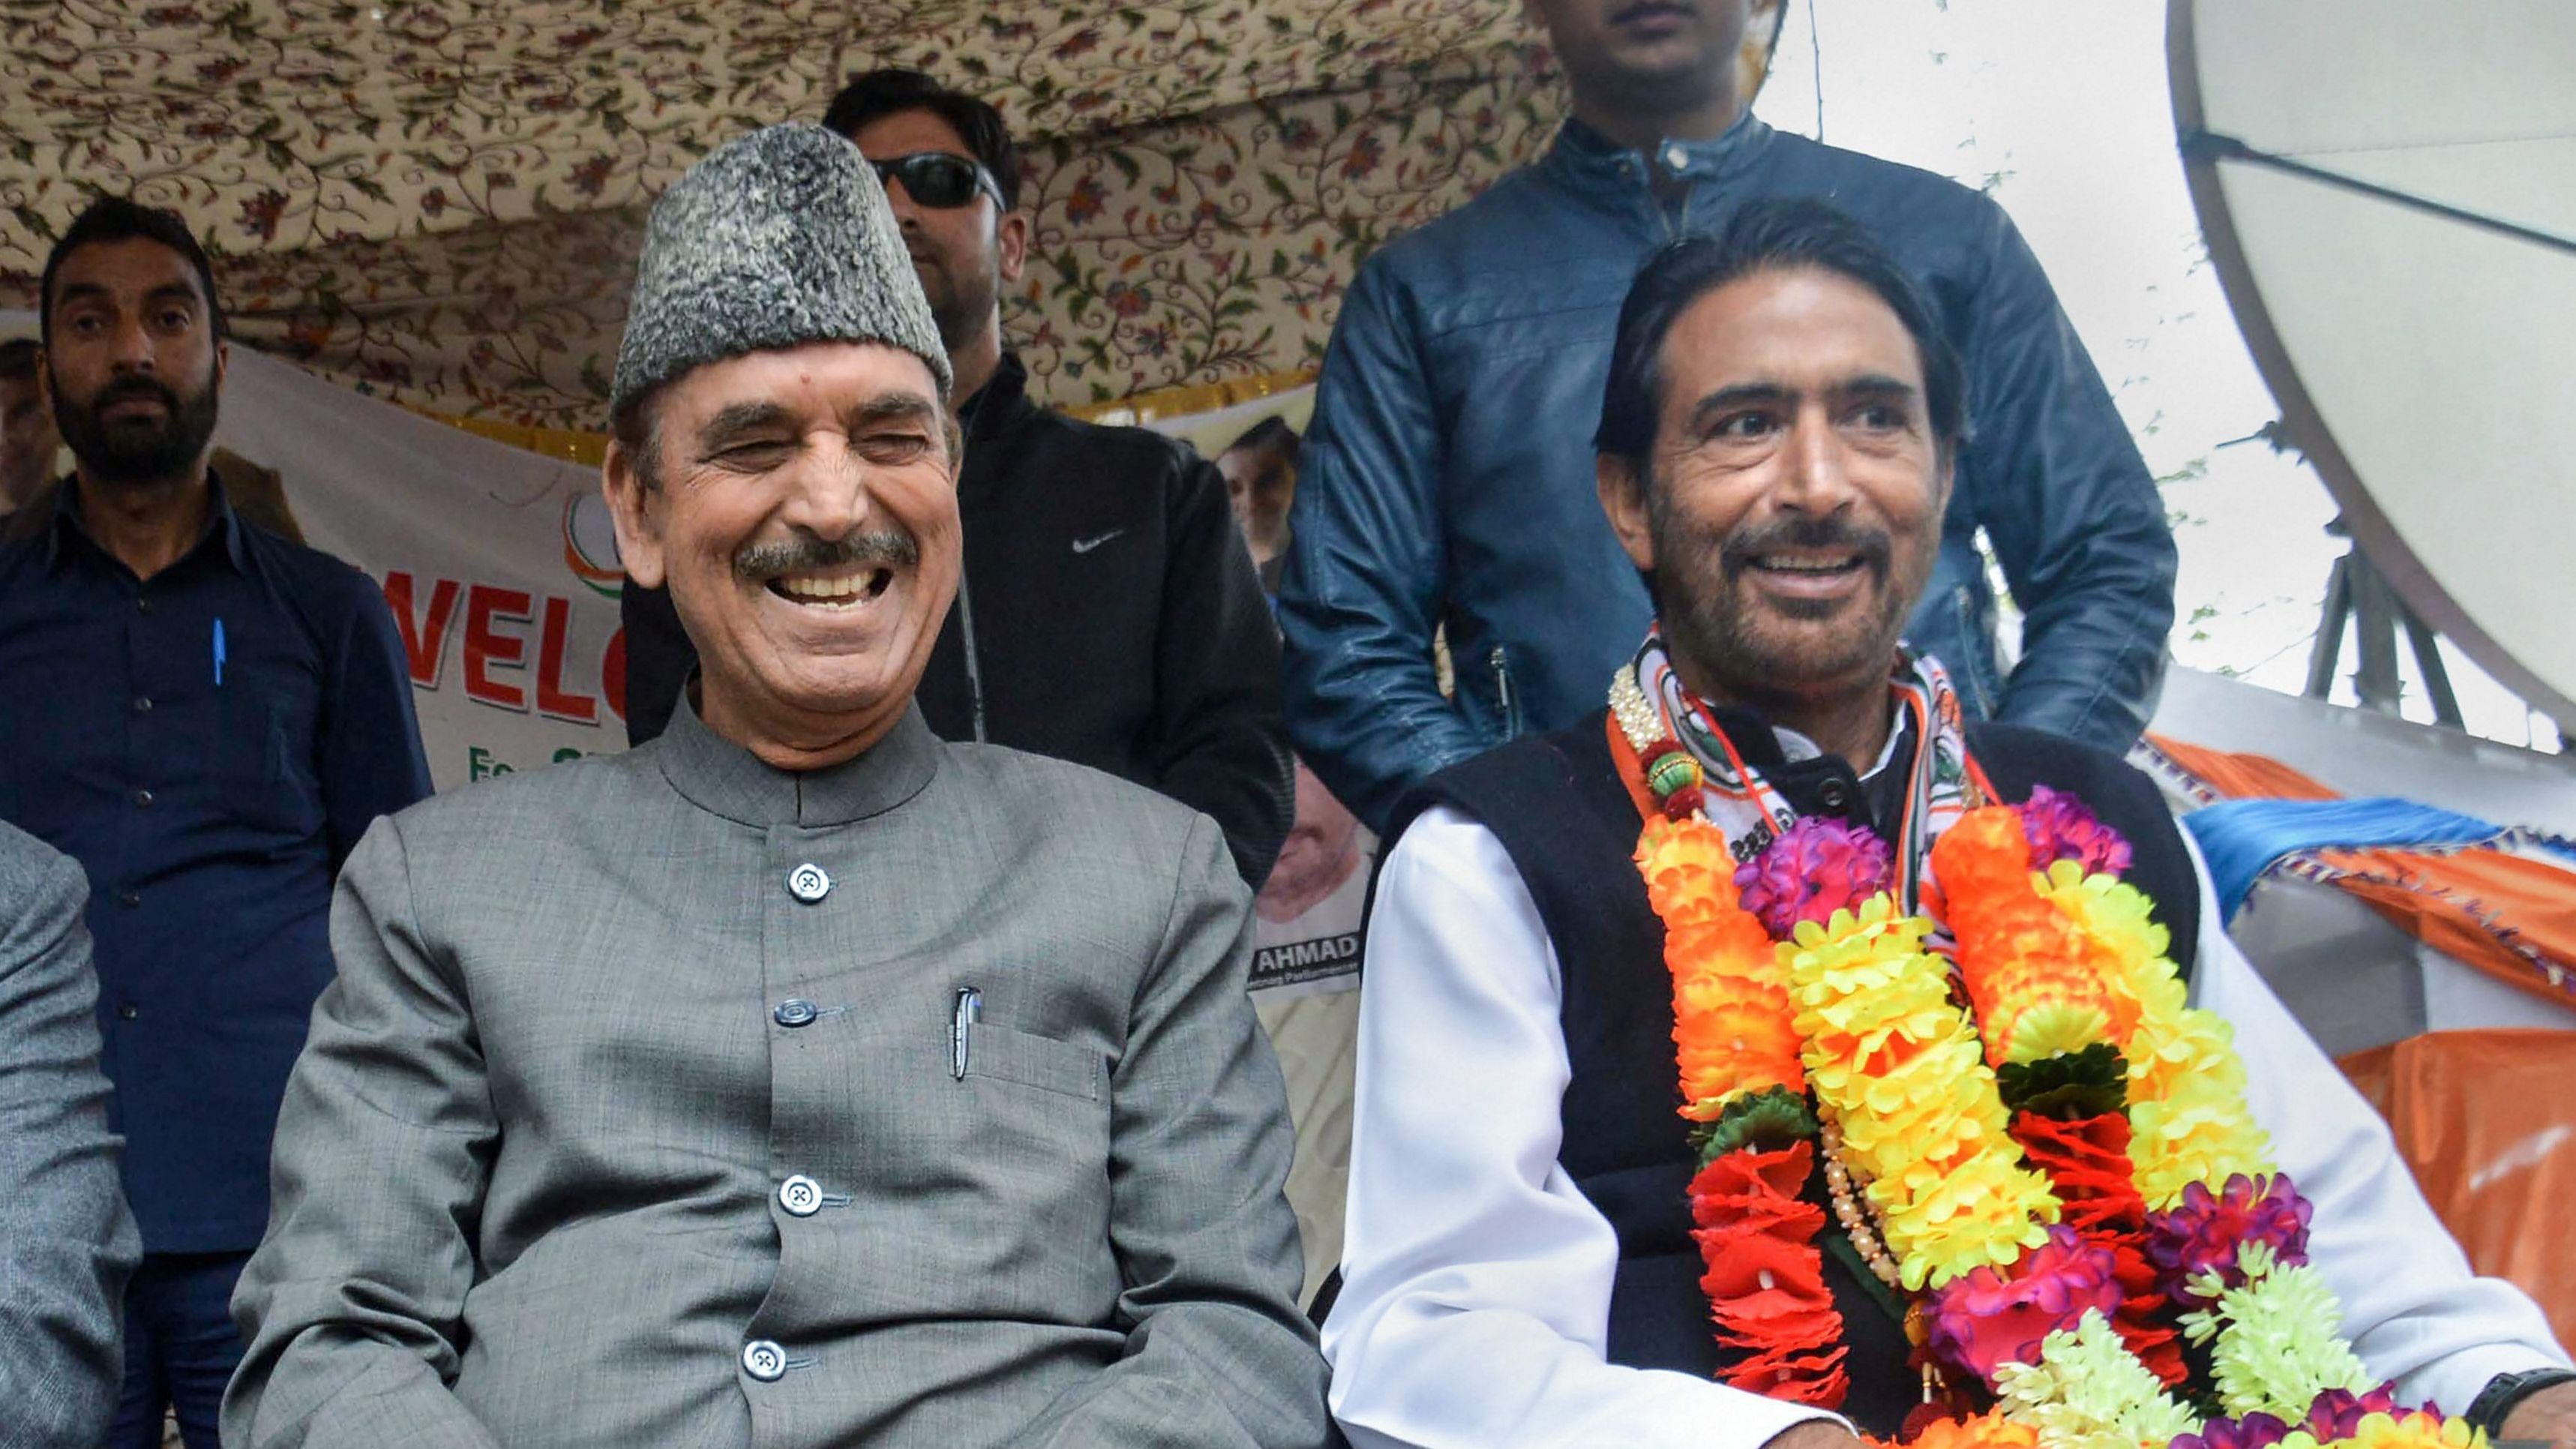 Senior Congress leader Ghulam Nabi Azad along with Anantnag parliamentary candidate & state party chief Ghulam Ahmad Mir during an election rally, in Anantnag district of south Kashmir. Credit: PTI